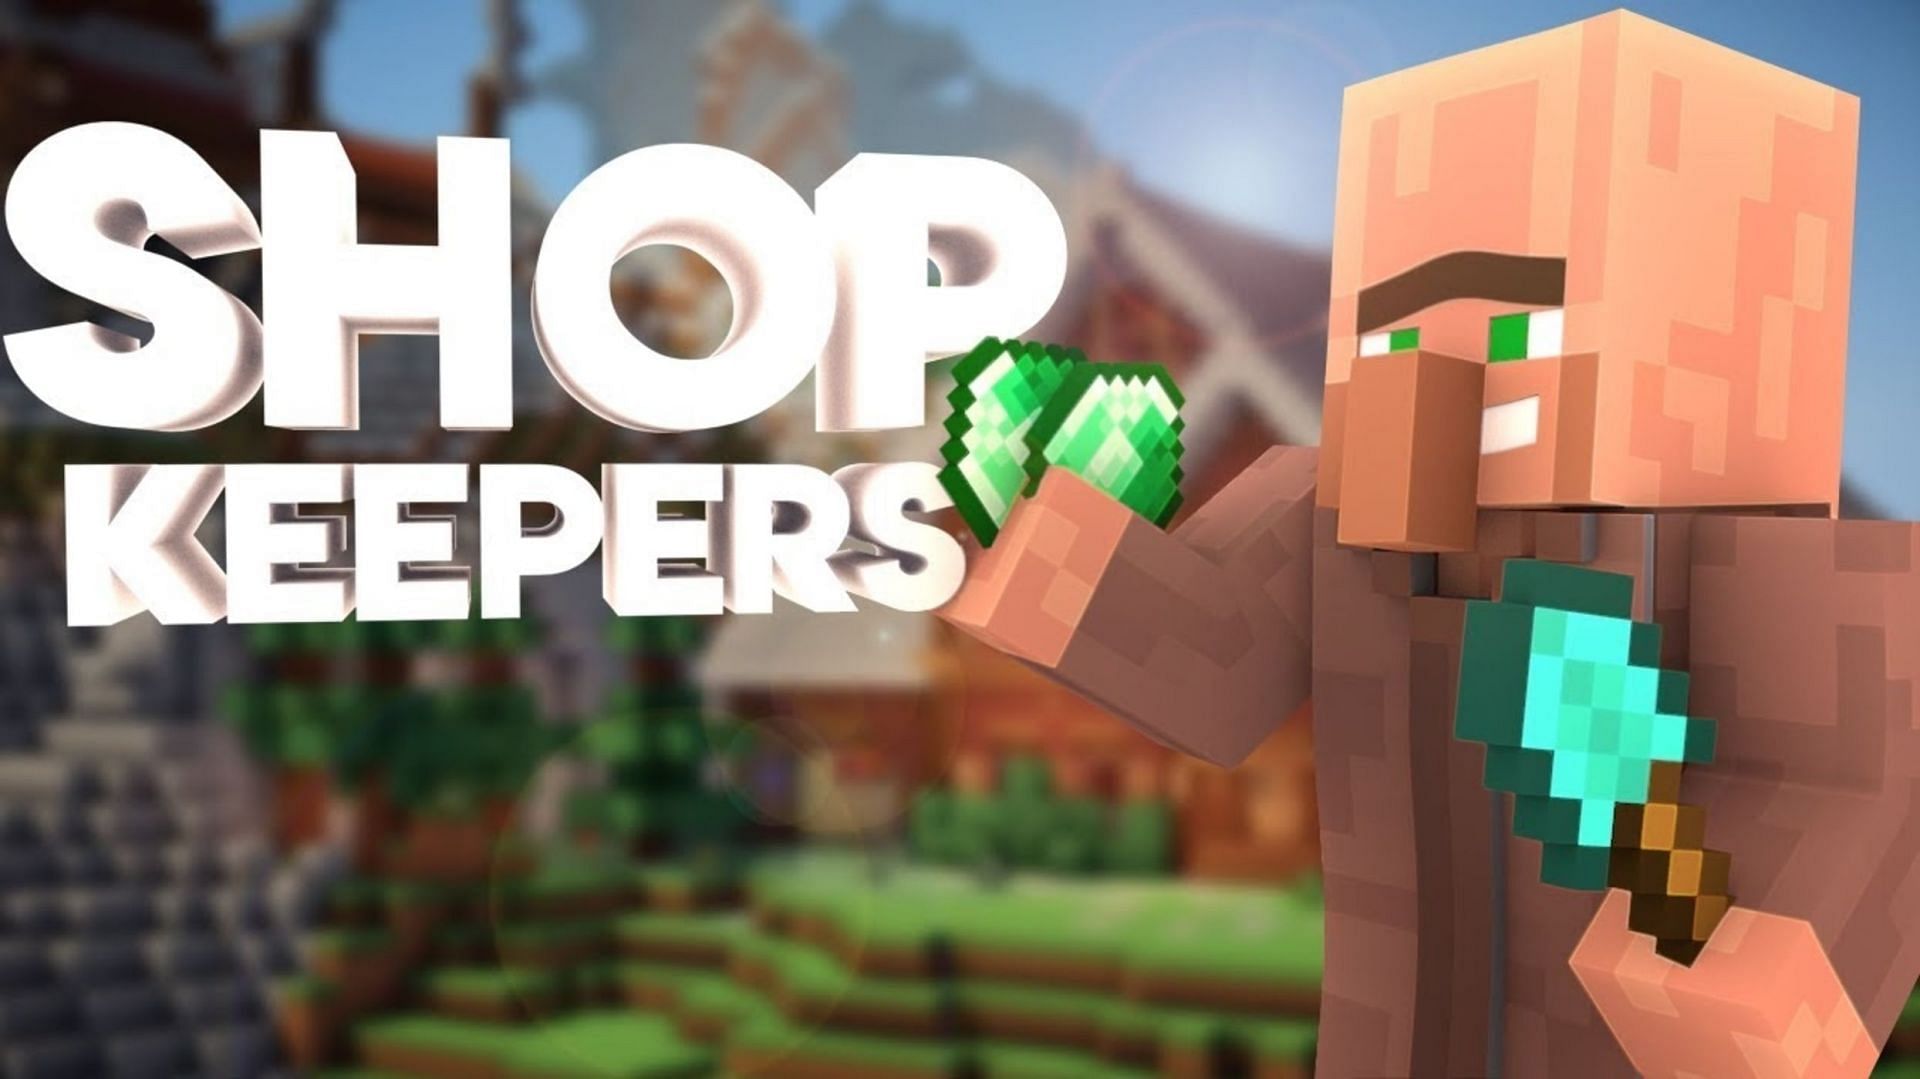 Shopkeepers establishes custom villager trades for players to purchase exactly what they need (Image via Diamondxr/Youtube)